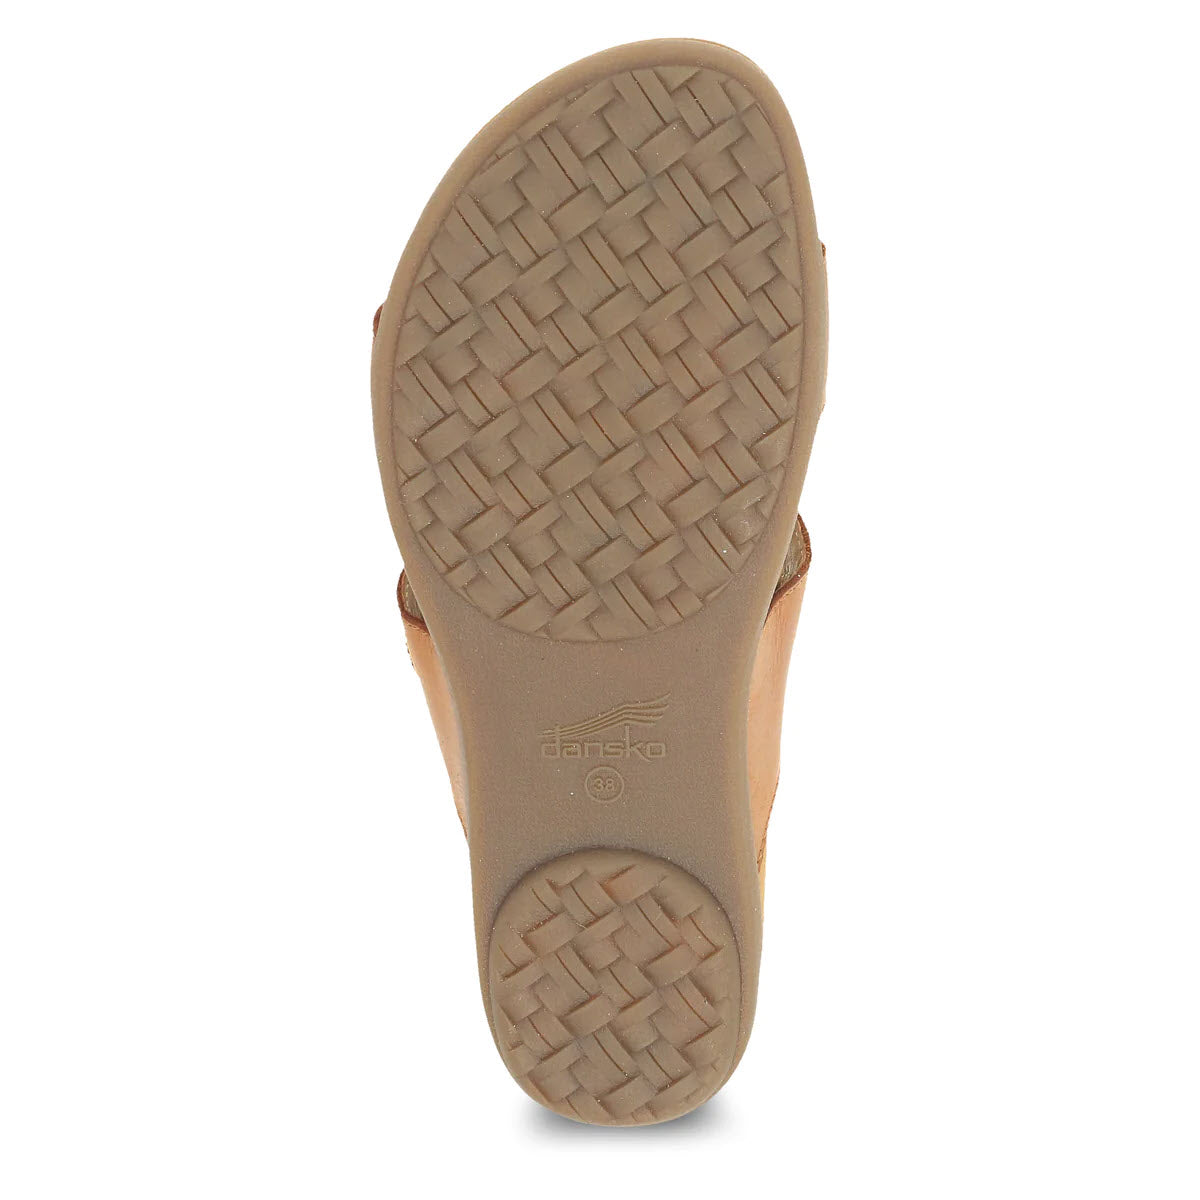 Bottom view of a Dansko Justine Luggage shoe showing a tan sole with a woven pattern and the brand name &quot;dansko&quot; embossed in the center, perfect for casual all-day wear.